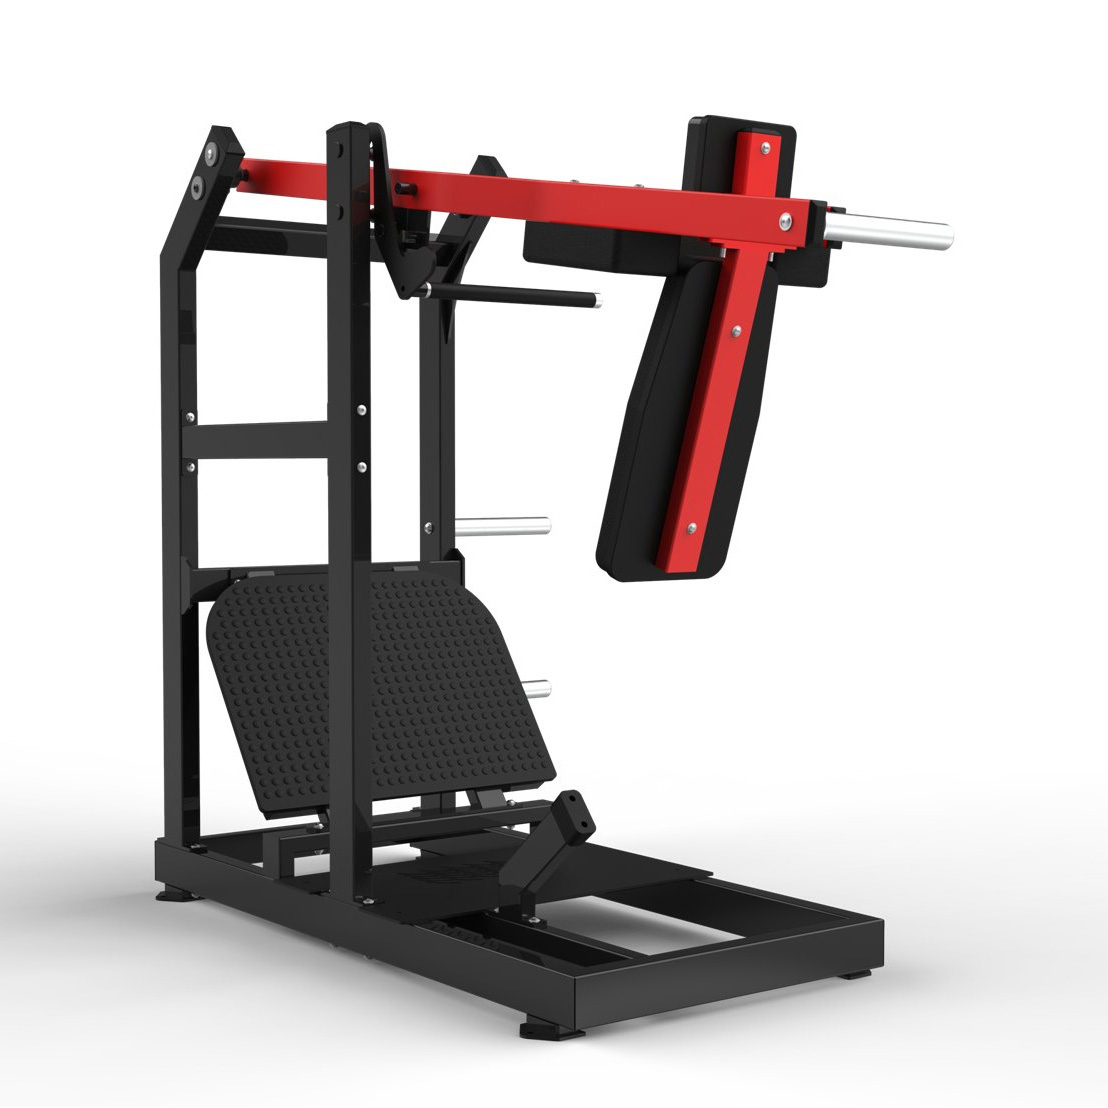 8 low impact exercise equipment you can get today